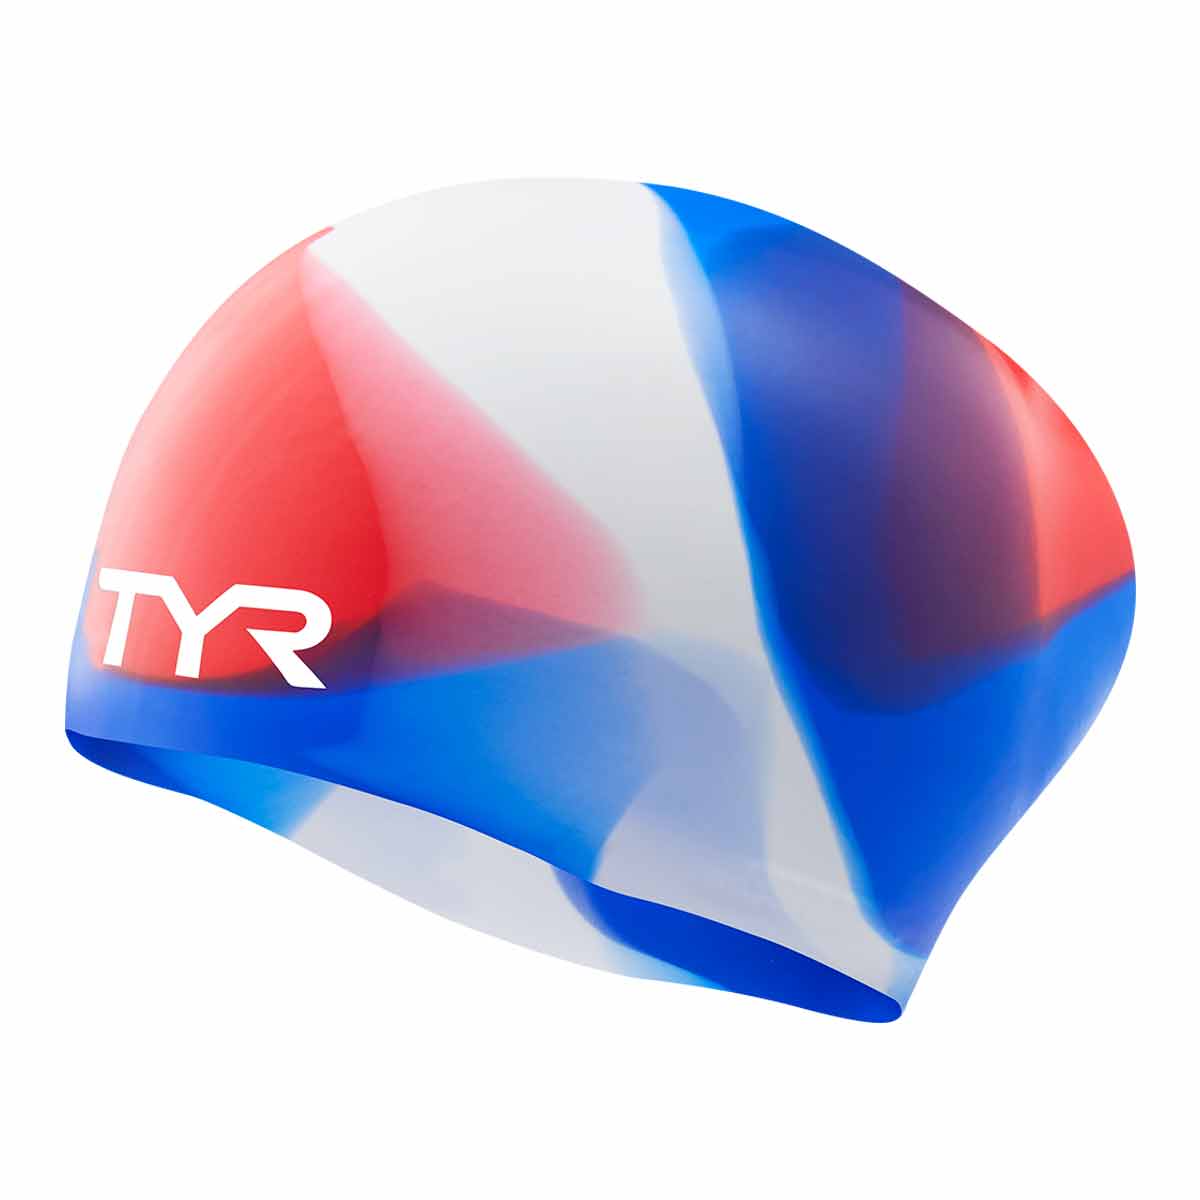 TYR Tie Dye Youth Long Haired Silicone Swim Cap - Red/White/Blue